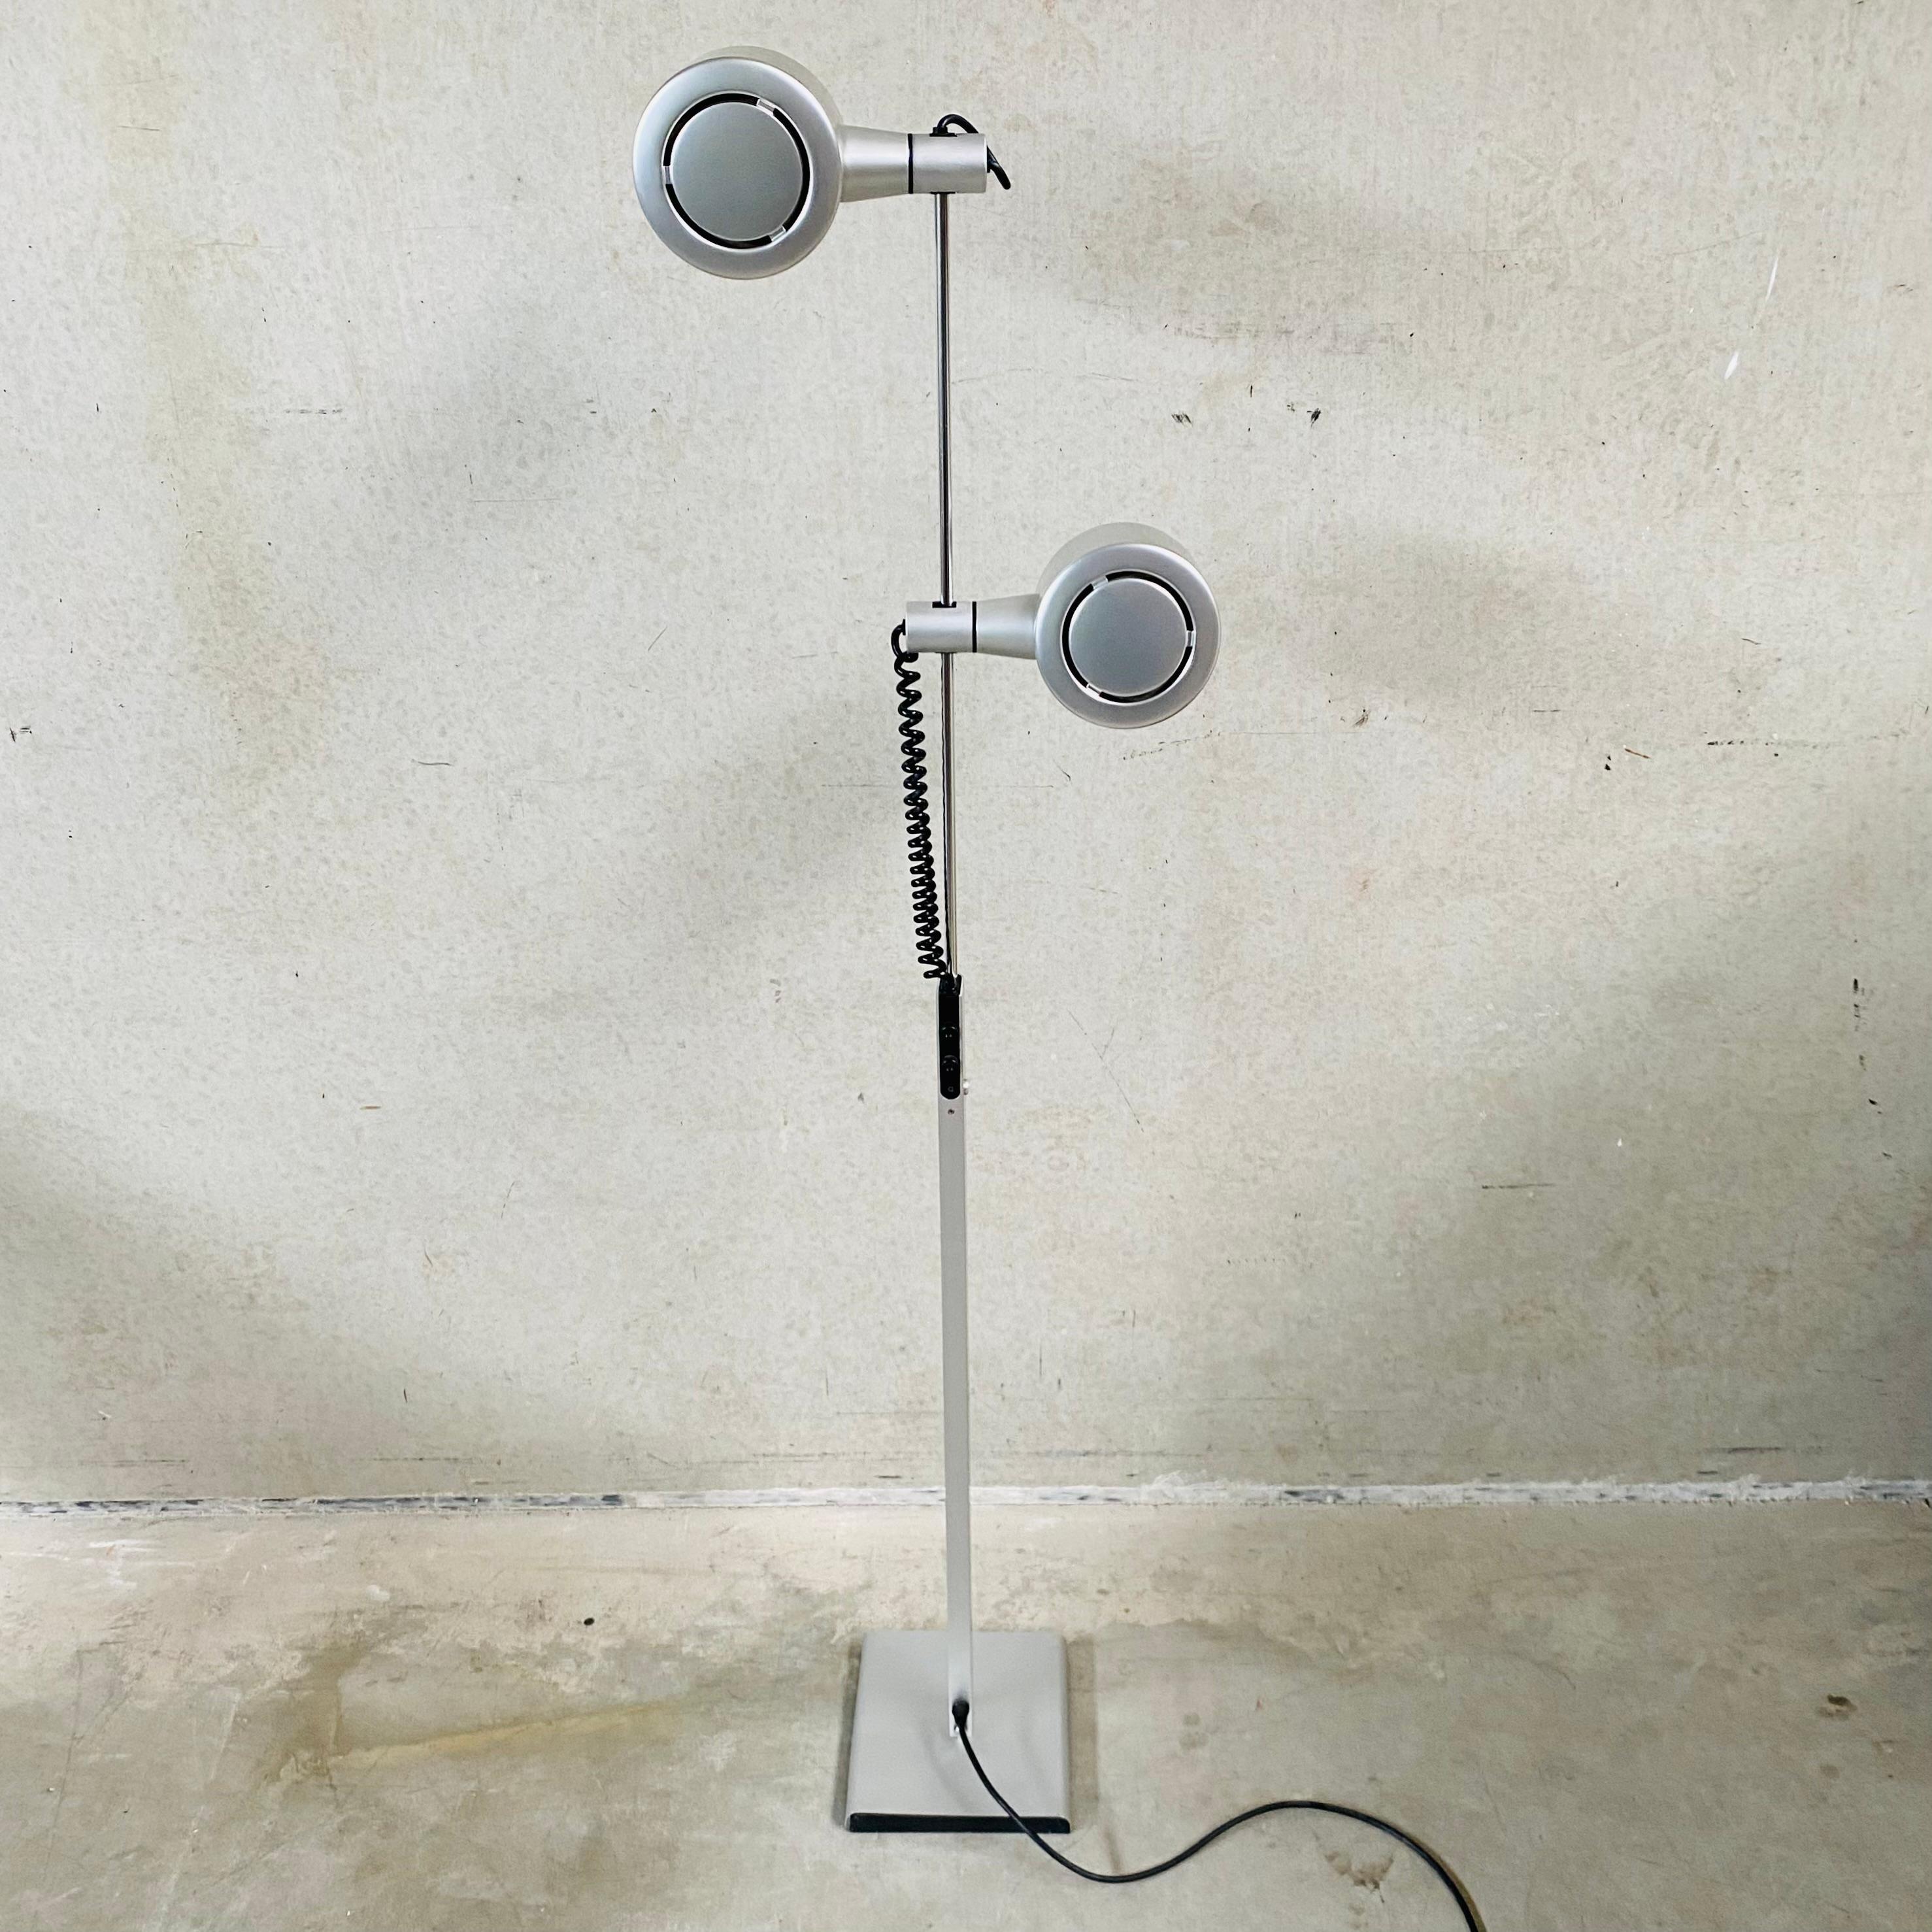 British QC Twin Spotlicht Floor Lamp by Ronald Homes for Conelicht Limited, UK, 1970s For Sale